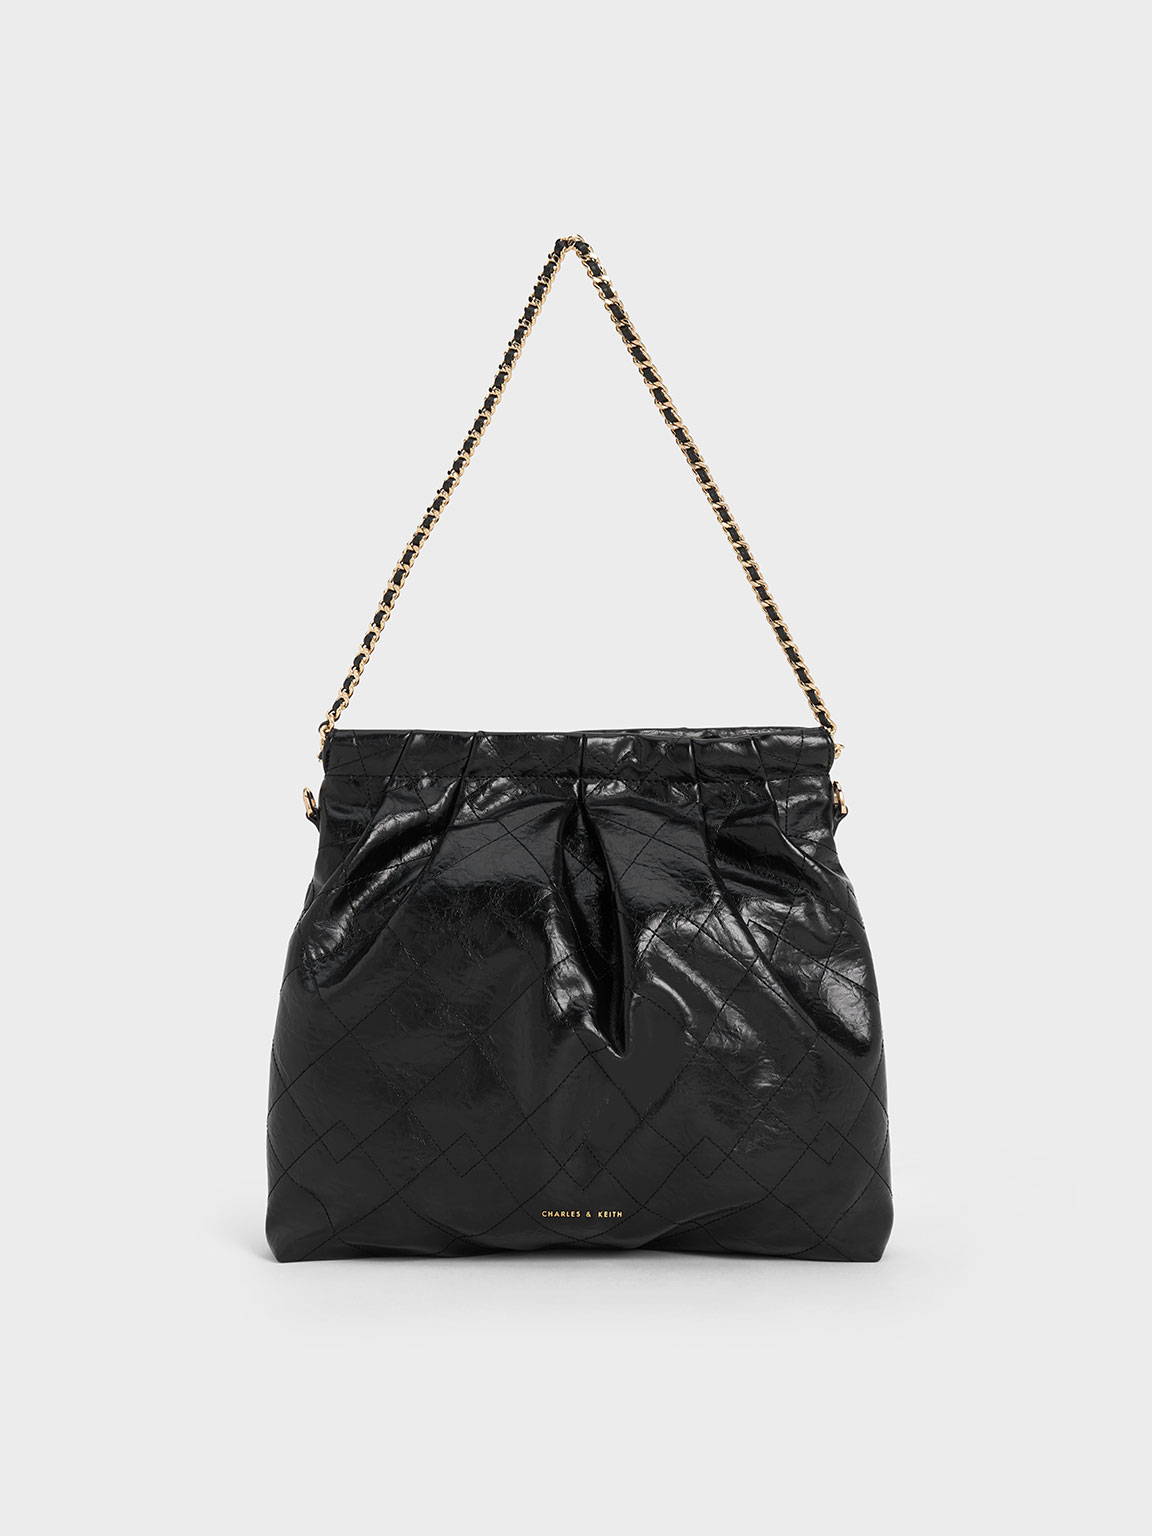 Charles & Keith - Women's Duo Double Chain Hobo Bag, Black, L